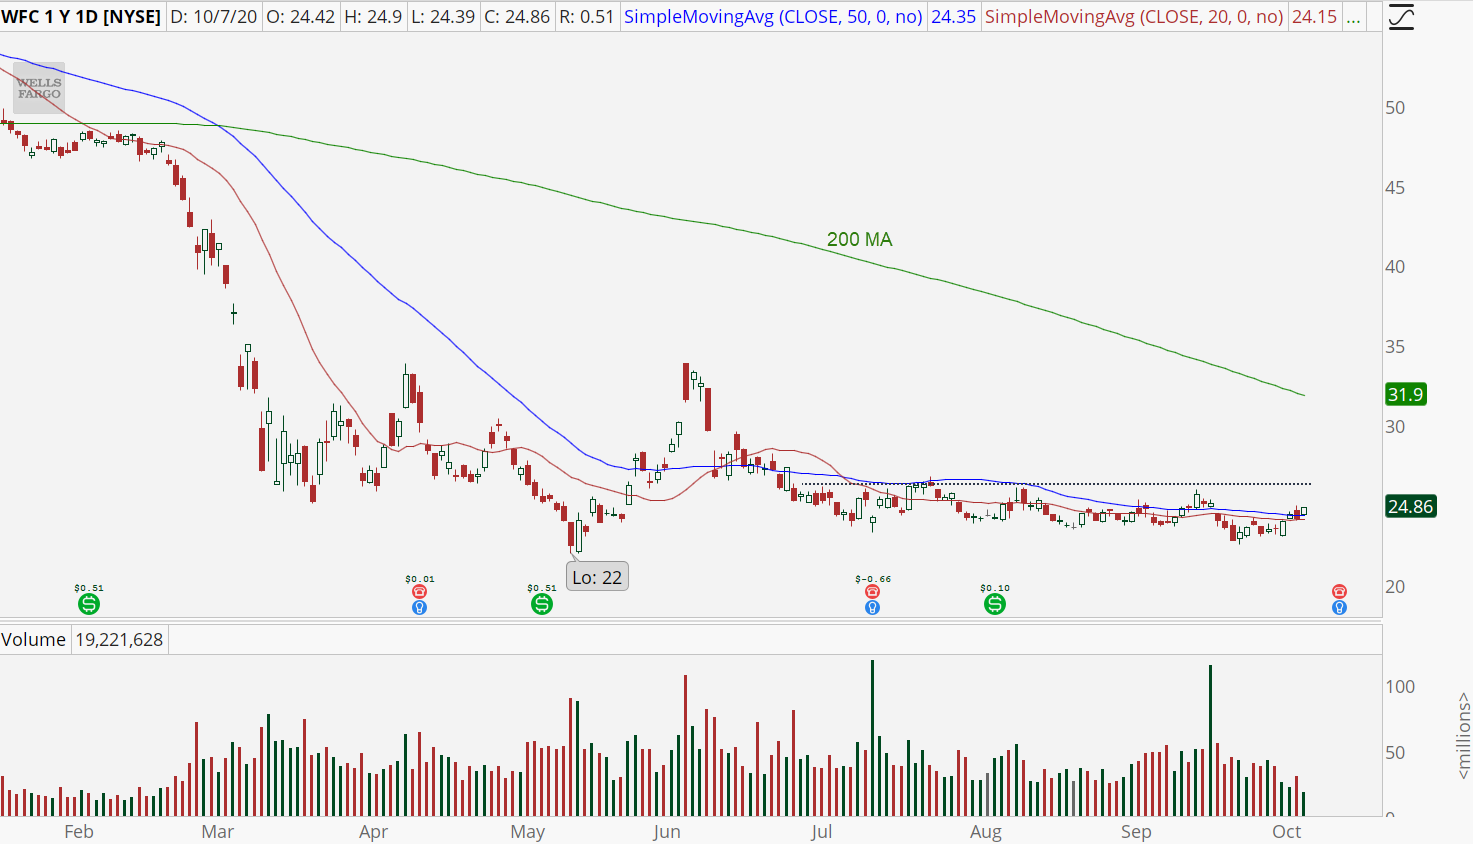 Wells Fargo (WFC) daily chart showing neutral trend